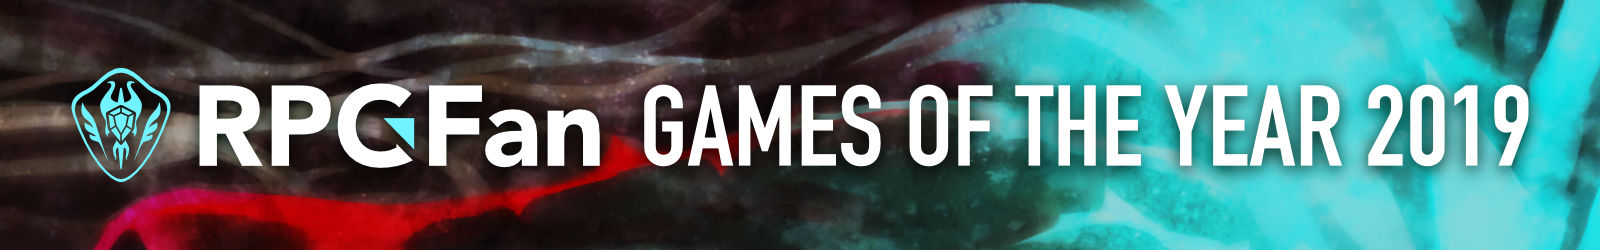 RPGFan Games of the Year 2019